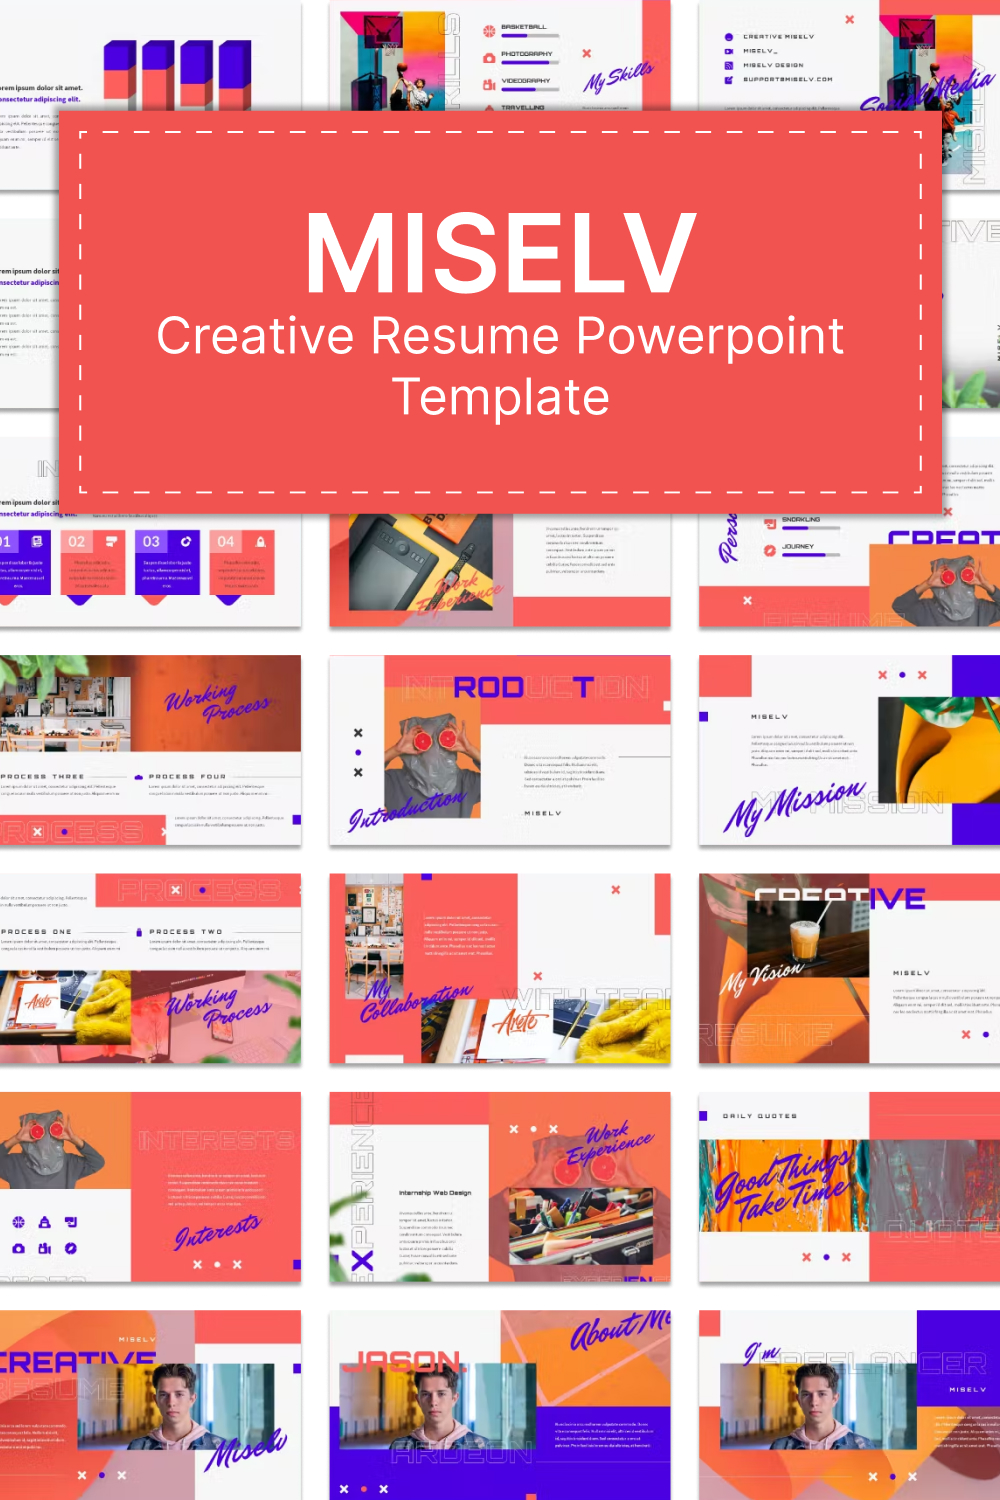 Miselv creative resume powerpoint template of pinterest.